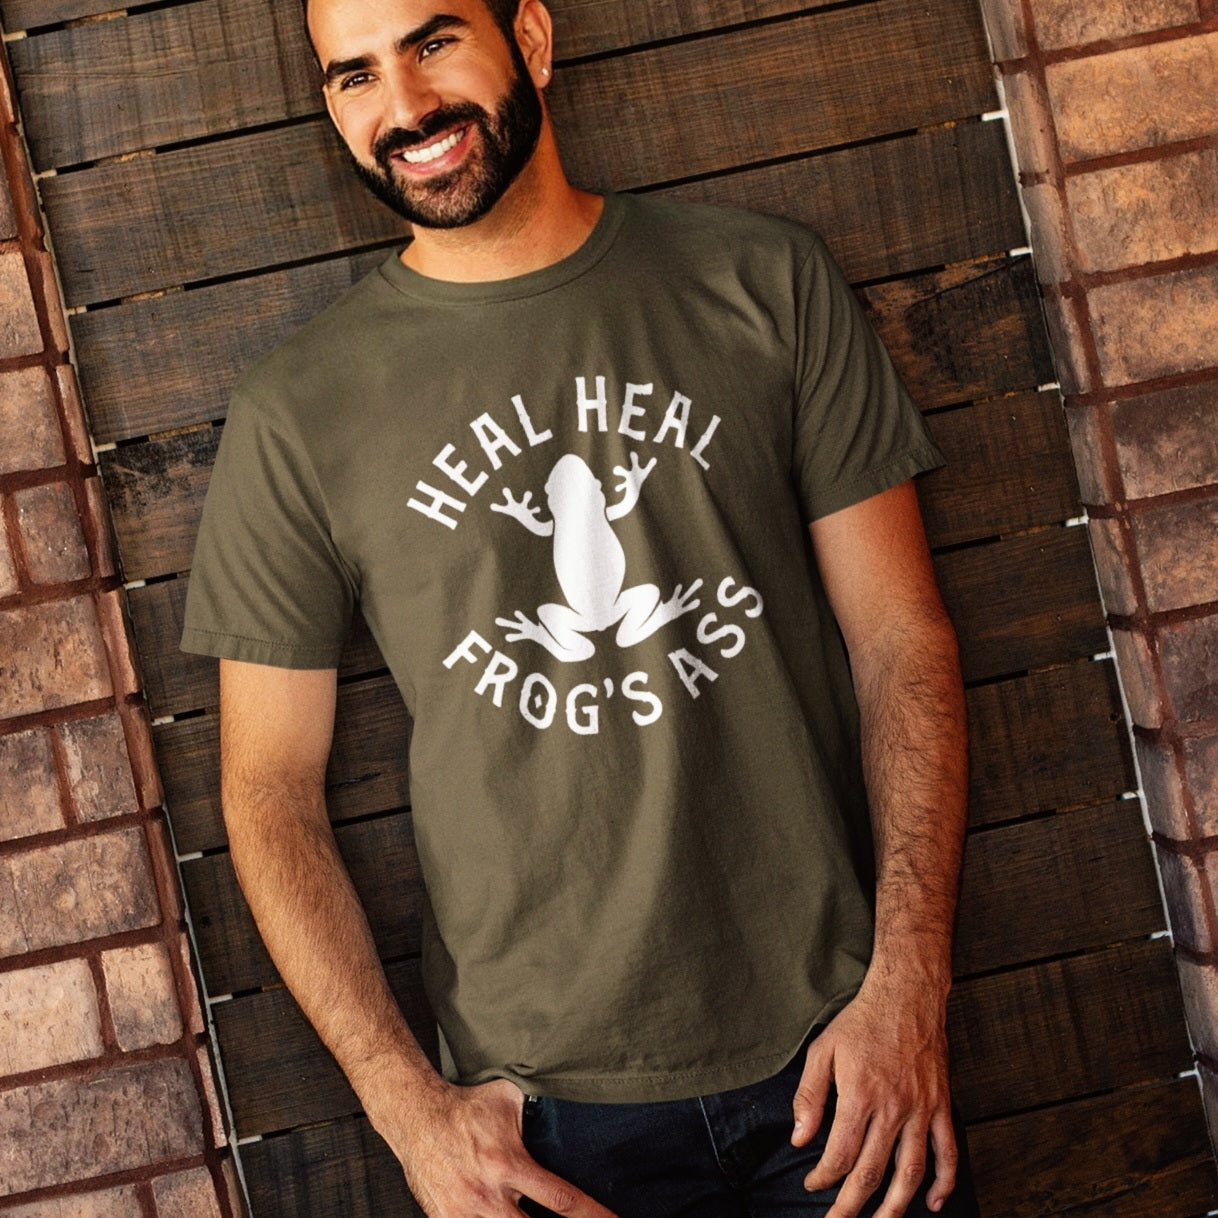 hispanic man wearing a funny navy green t-shirt for Latino culture. the graphic depicts a frog and the words "heal heal frog's ass" in honor of sana sana colita de Rana